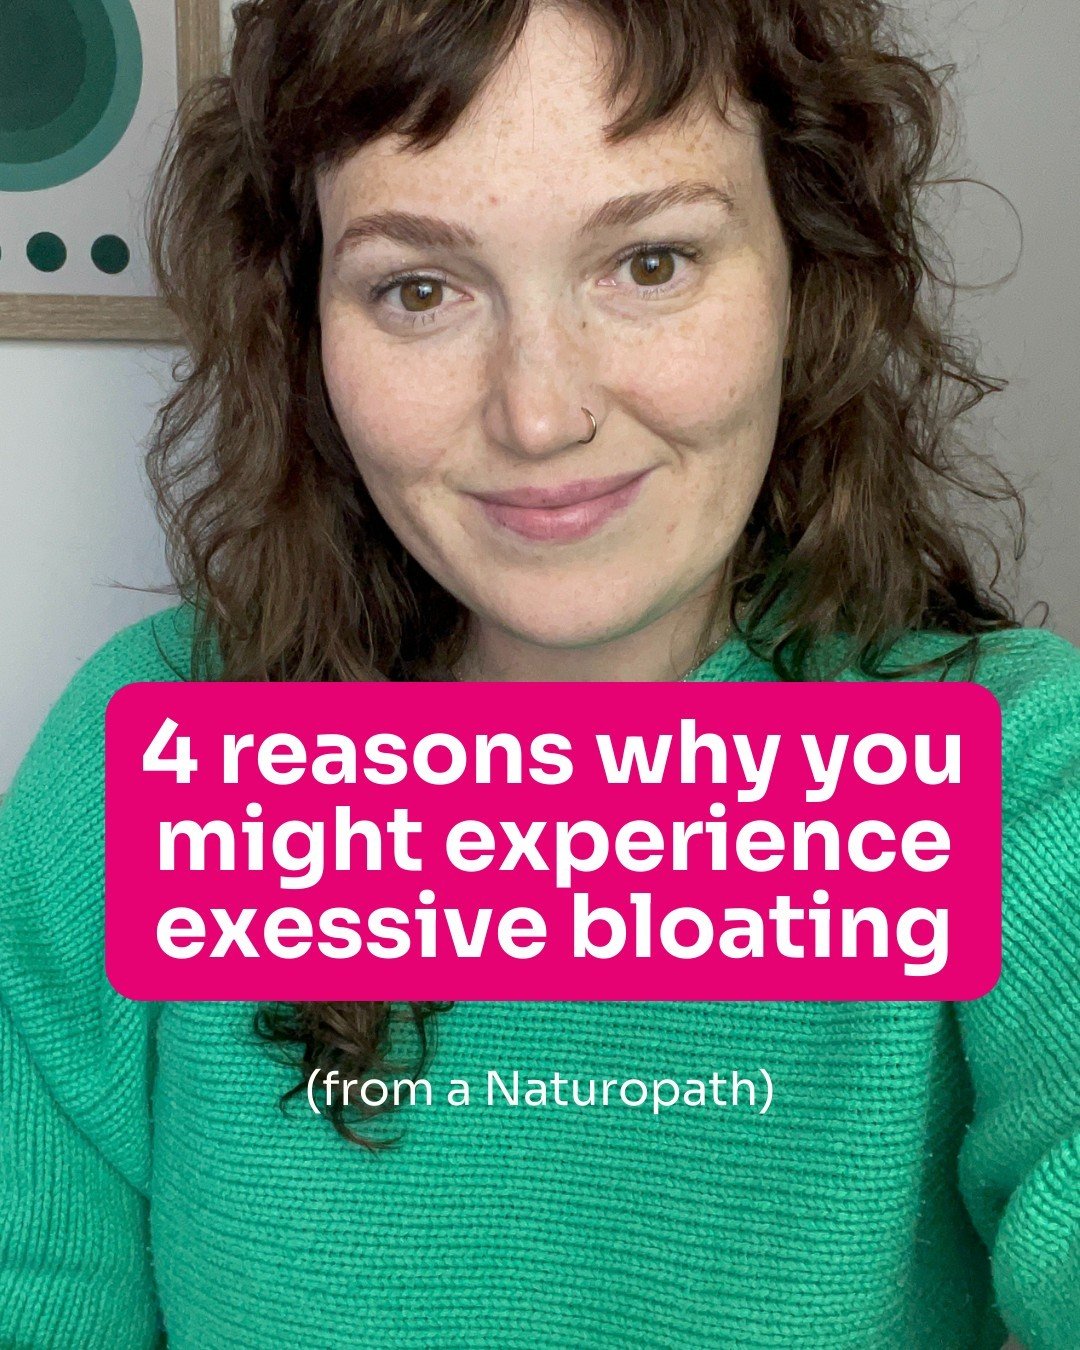 So many people put up with exessive bloating when there are many things we can do to help. 

Let me know in the comments if you'd like a list of my most recommended products for excessive bloating. 

#bloating #guthealth #wellbeing #wellness